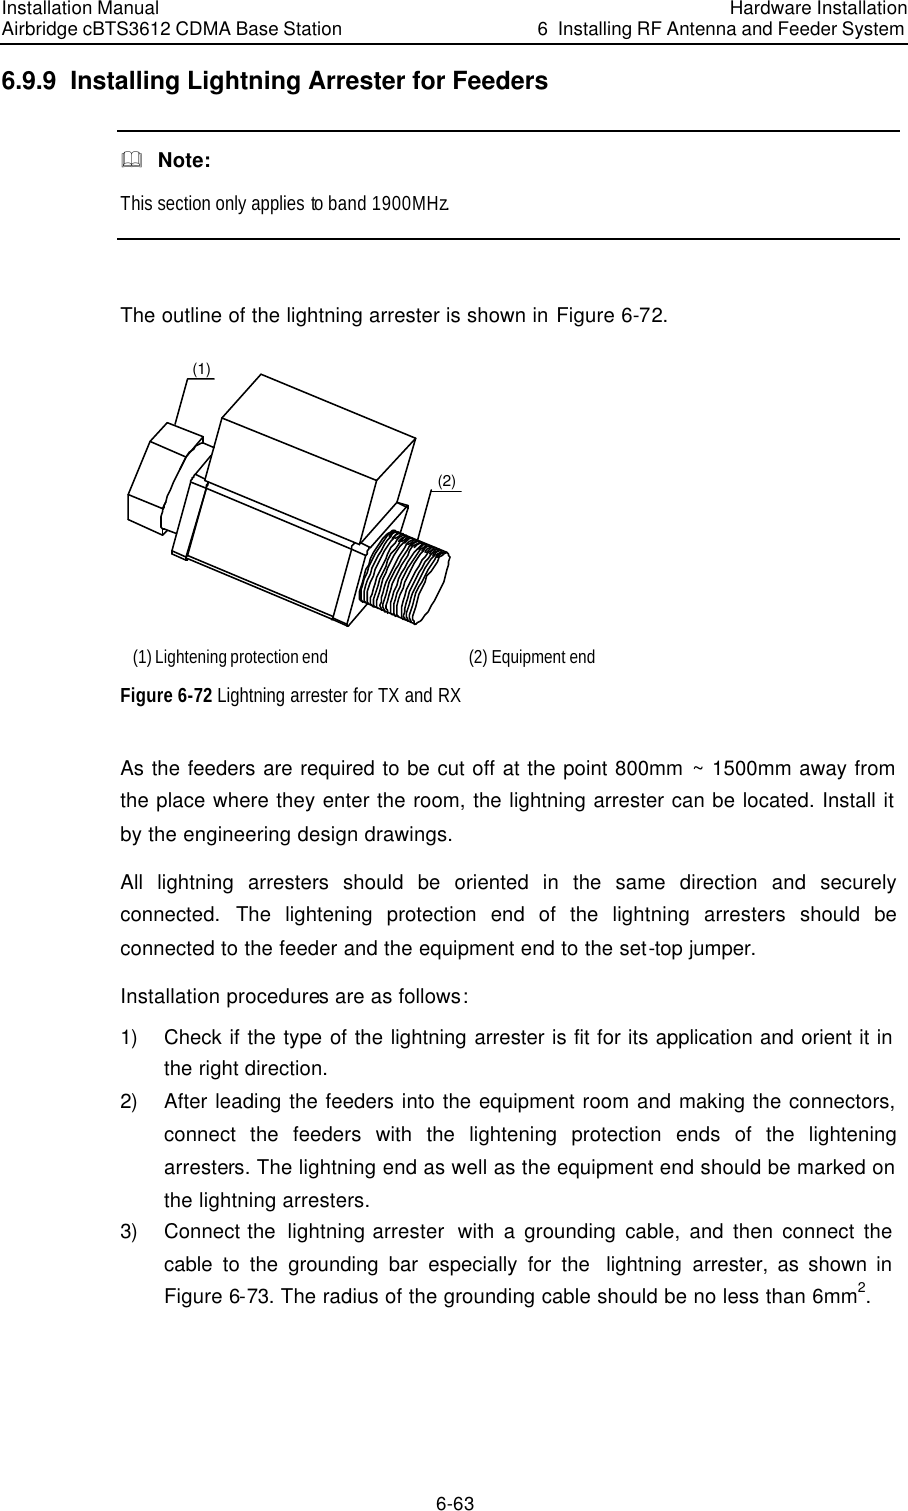 Installation Manual Airbridge cBTS3612 CDMA Base Station Hardware Installation6  Installing RF Antenna and Feeder System 6-63 6.9.9  Installing Lightning Arrester for Feeders &amp;  Note: This section only applies to band 1900MHz.  The outline of the lightning arrester is shown in Figure 6-72.  (1)(2) (1) Lightening protection end (2) Equipment end Figure 6-72 Lightning arrester for TX and RX As the feeders are required to be cut off at the point 800mm ~ 1500mm away from the place where they enter the room, the lightning arrester can be located. Install it by the engineering design drawings.  All lightning arresters should be oriented in the same direction and securely connected. The lightening protection end of the lightning arresters should be connected to the feeder and the equipment end to the set-top jumper. Installation procedures are as follows: 1) Check if the type of the lightning arrester is fit for its application and orient it in the right direction.  2) After leading the feeders into the equipment room and making the connectors, connect the feeders with the lightening protection ends of the lightening arresters. The lightning end as well as the equipment end should be marked on the lightning arresters. 3) Connect the  lightning arrester  with a grounding cable, and then connect the cable to the grounding bar especially for the  lightning arrester, as shown in Figure 6-73. The radius of the grounding cable should be no less than 6mm2. 